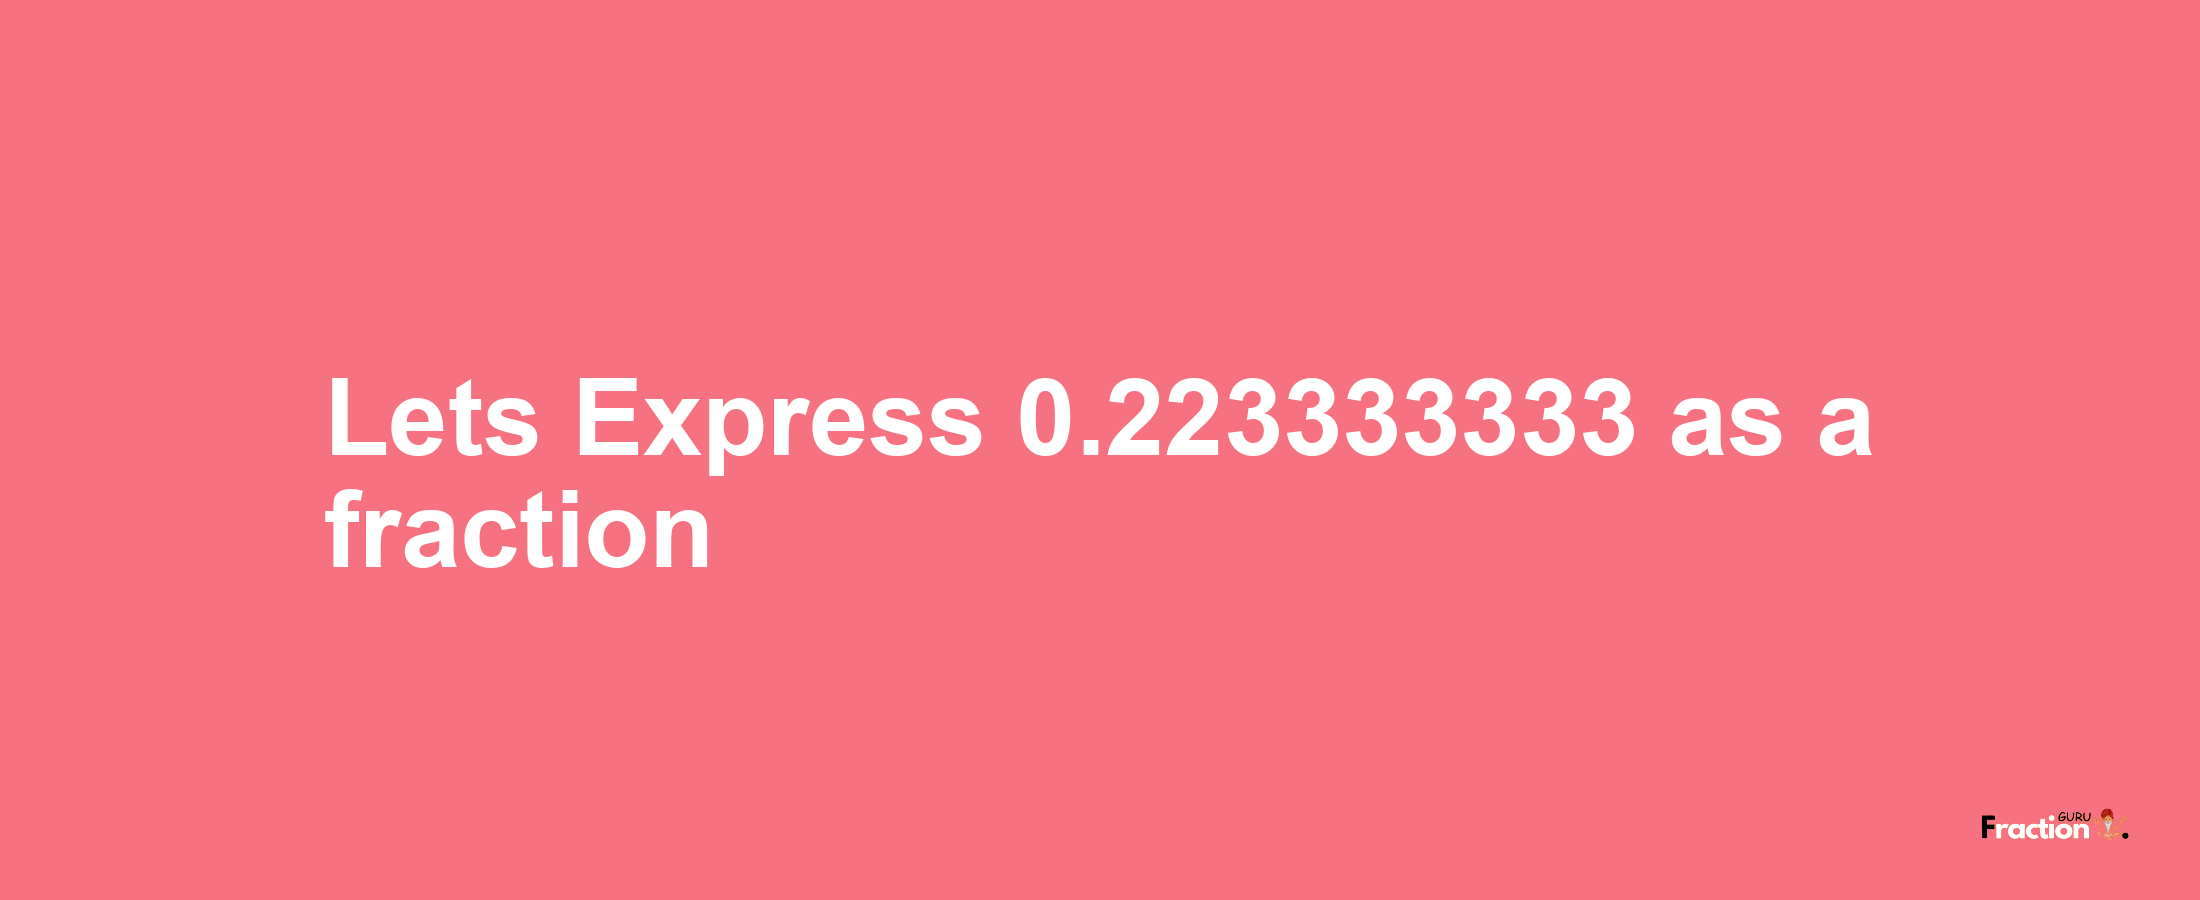 Lets Express 0.223333333 as afraction